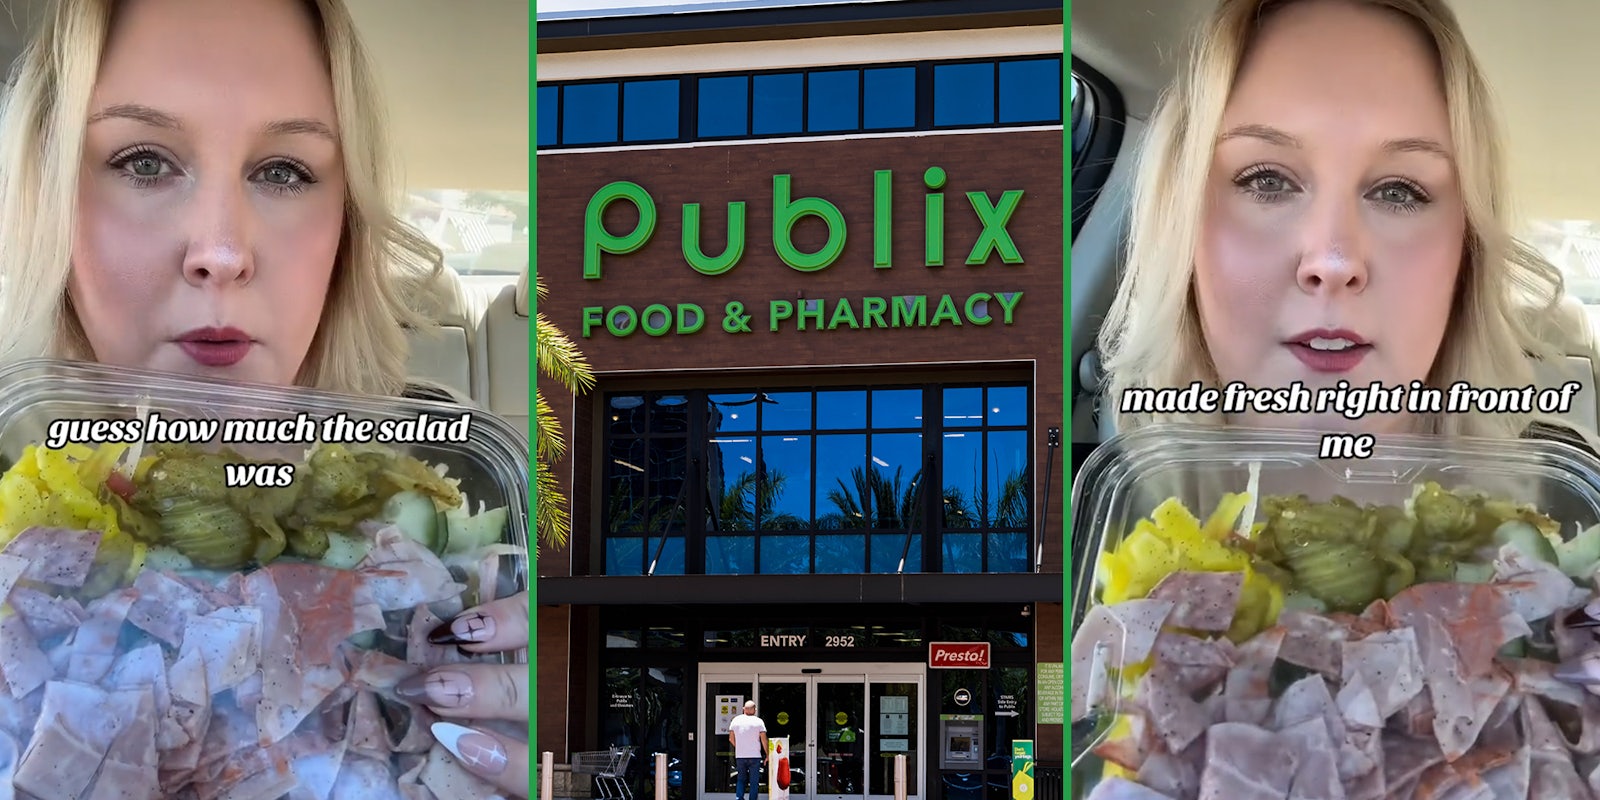 Customer buys salad made fresh from Publix. She can't believe how much she paid